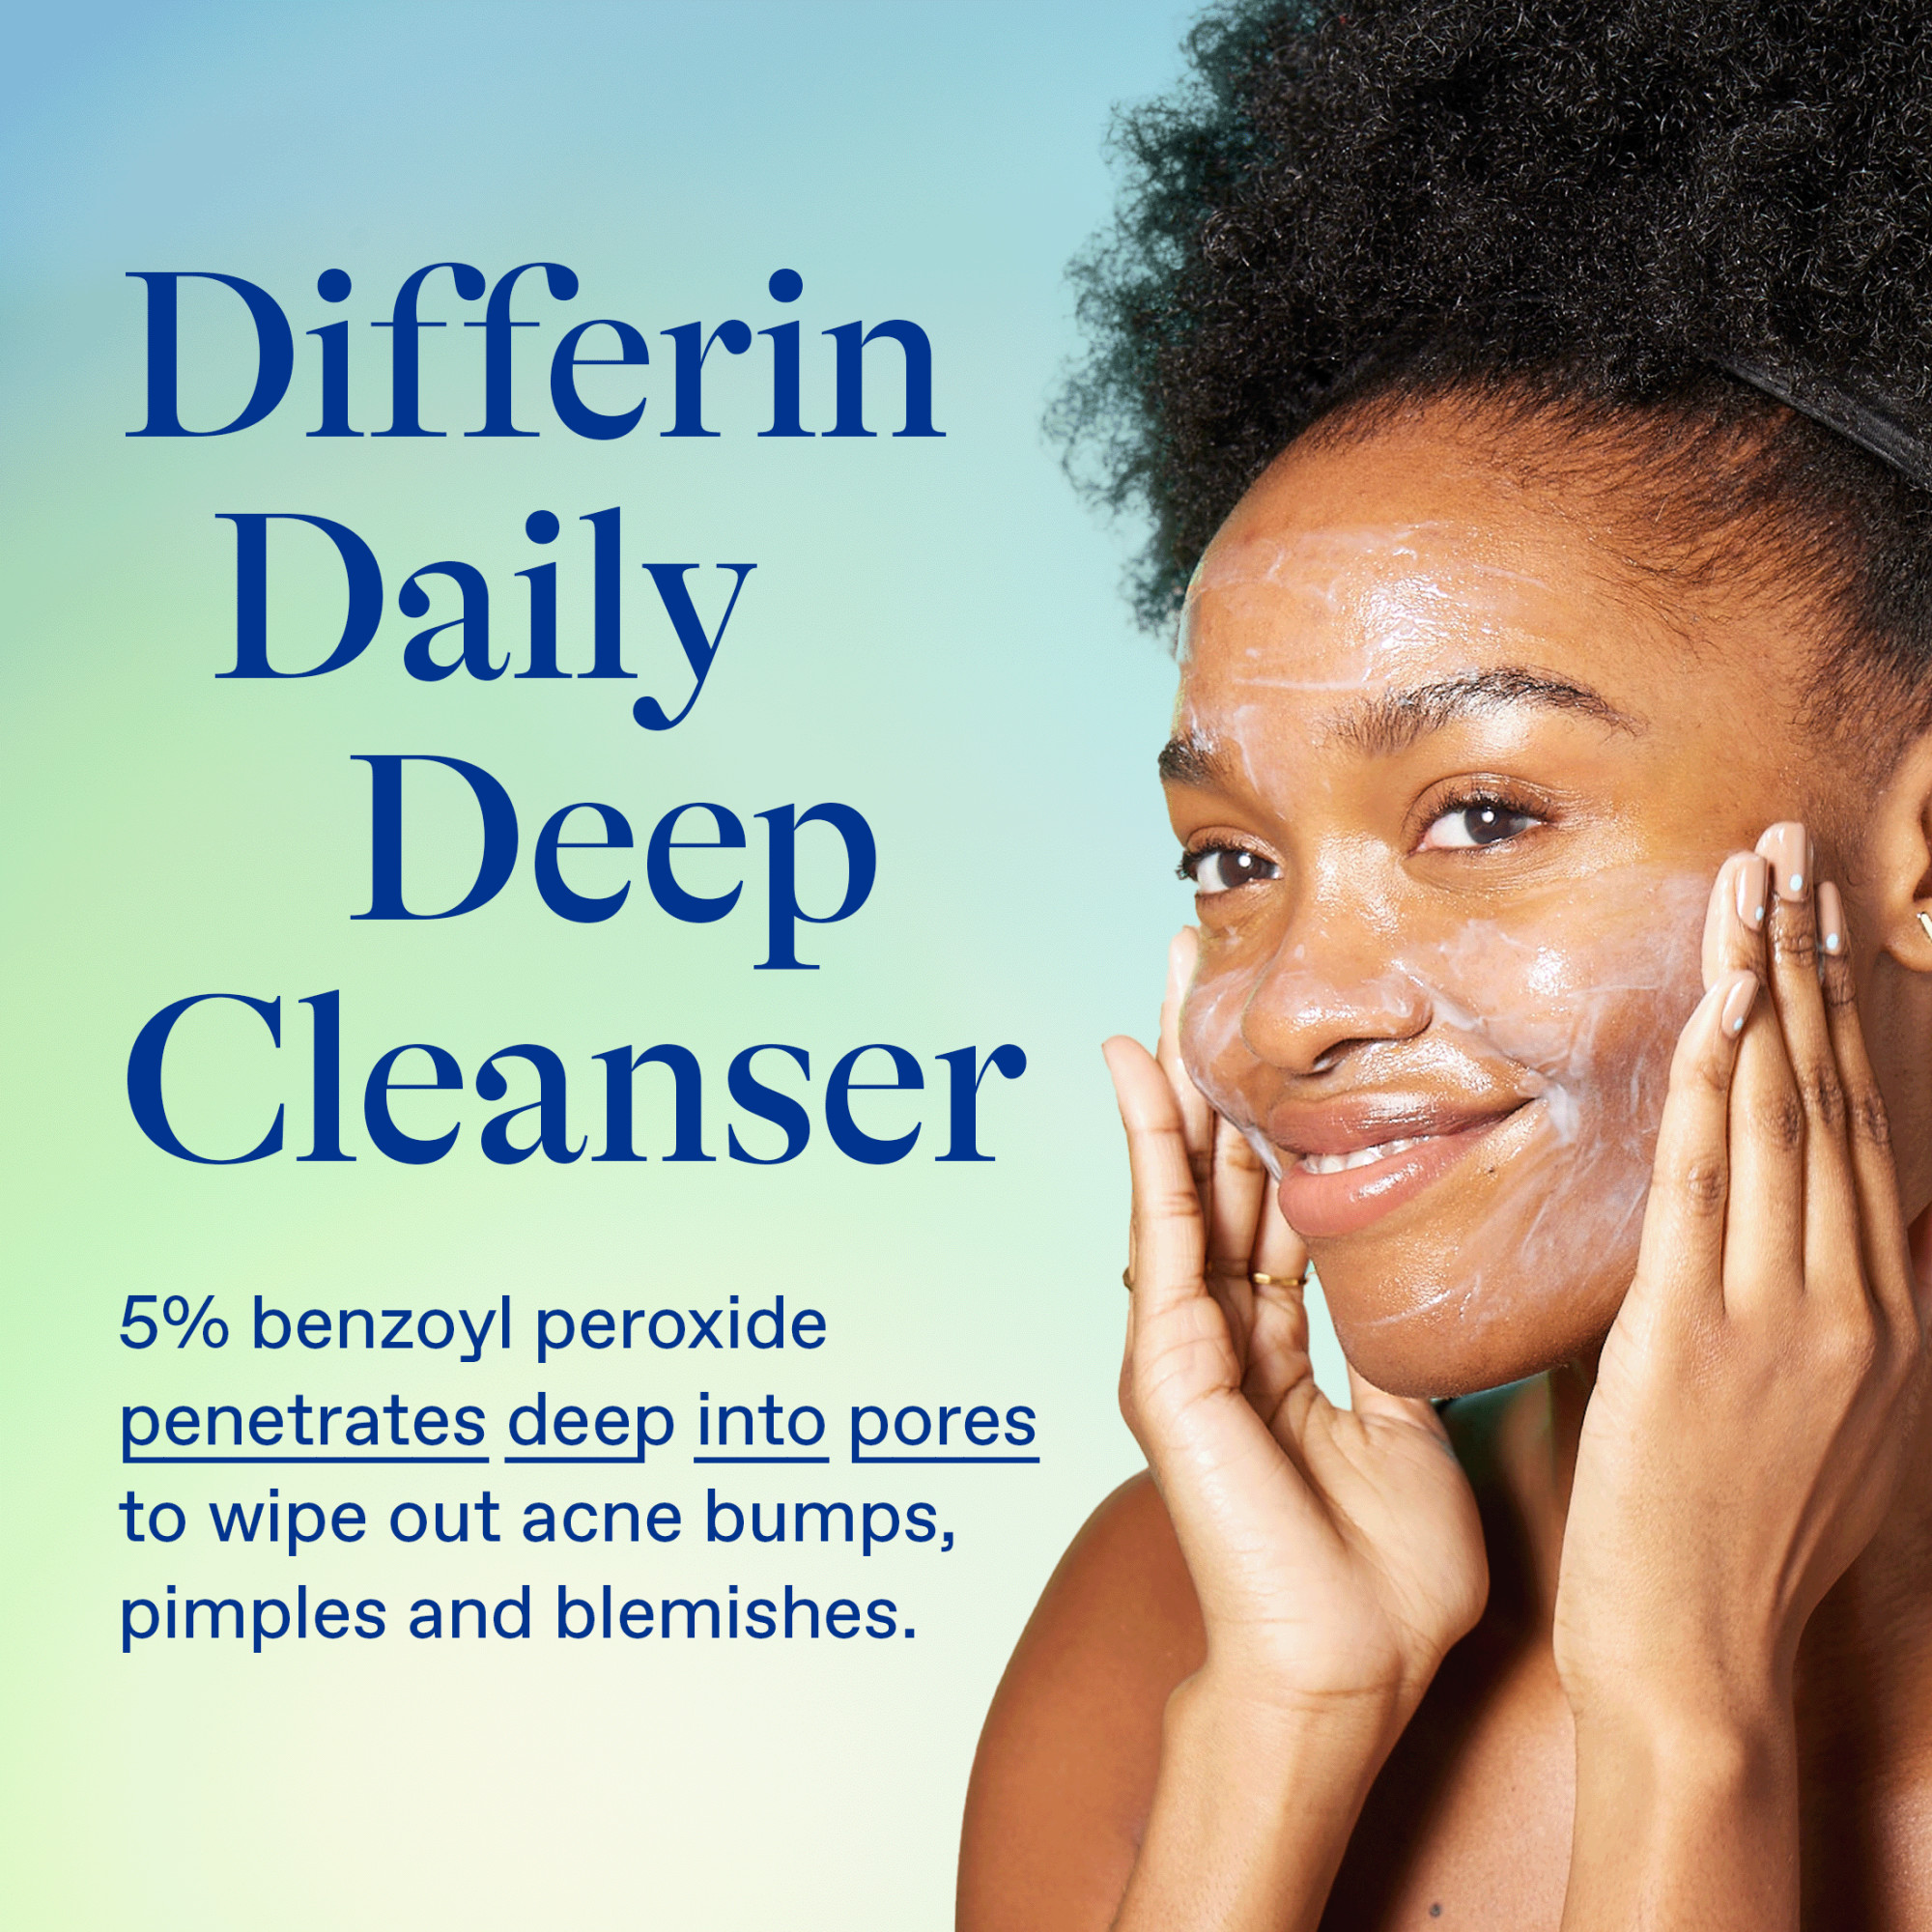 Differin Daily Deep Cleanser with 5% Benzoyl Peroxide, Face Wash for Acne Prone Skin, 4 oz - image 3 of 11